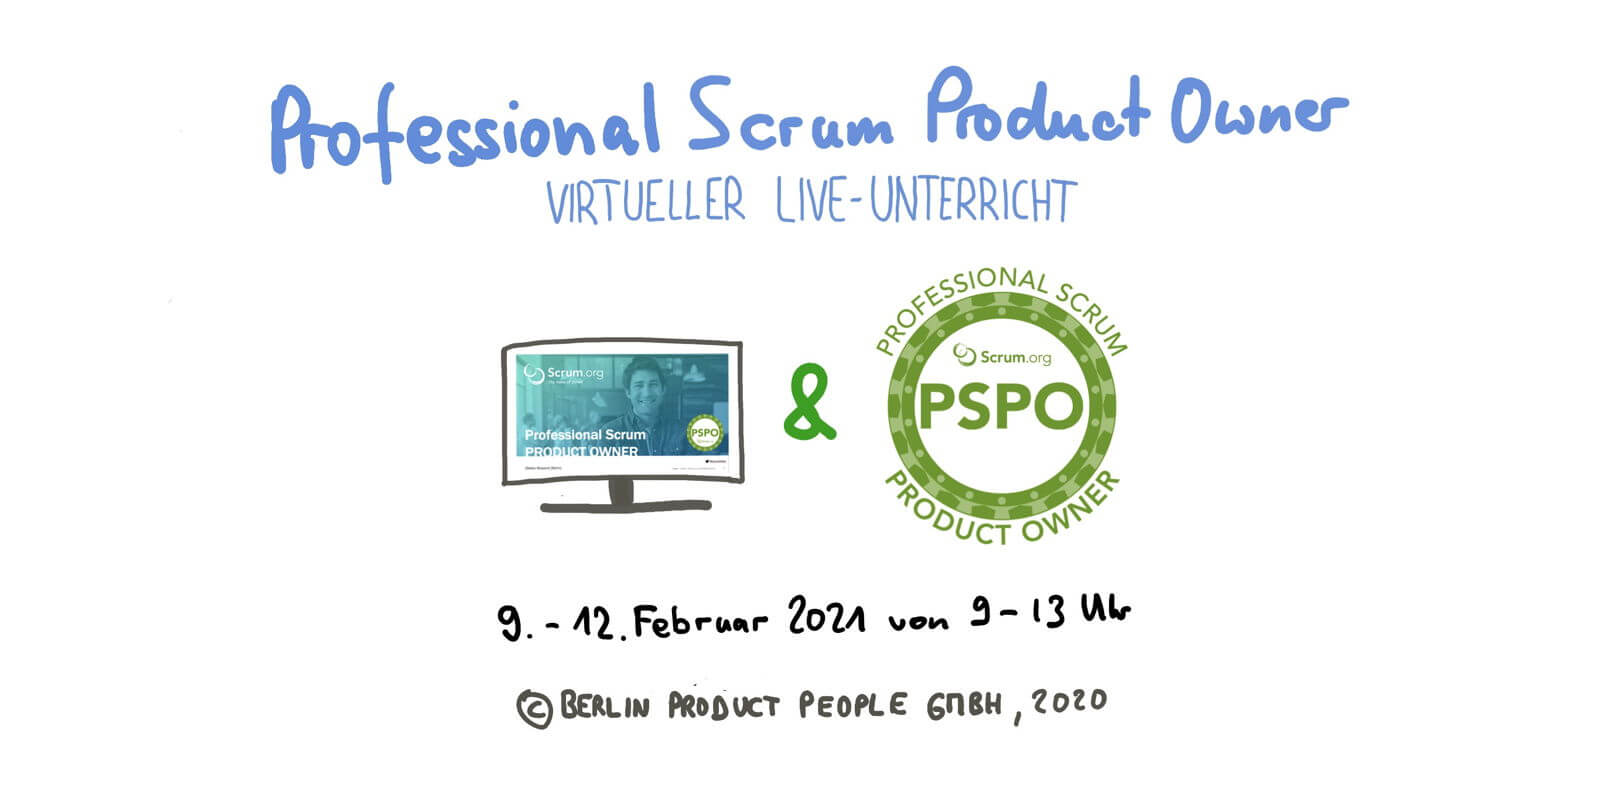 🖥 Professional Scrum Product Owner Training PSPO Certificate — Online: February 9-12, 2021 — Berlin Product People GmbH